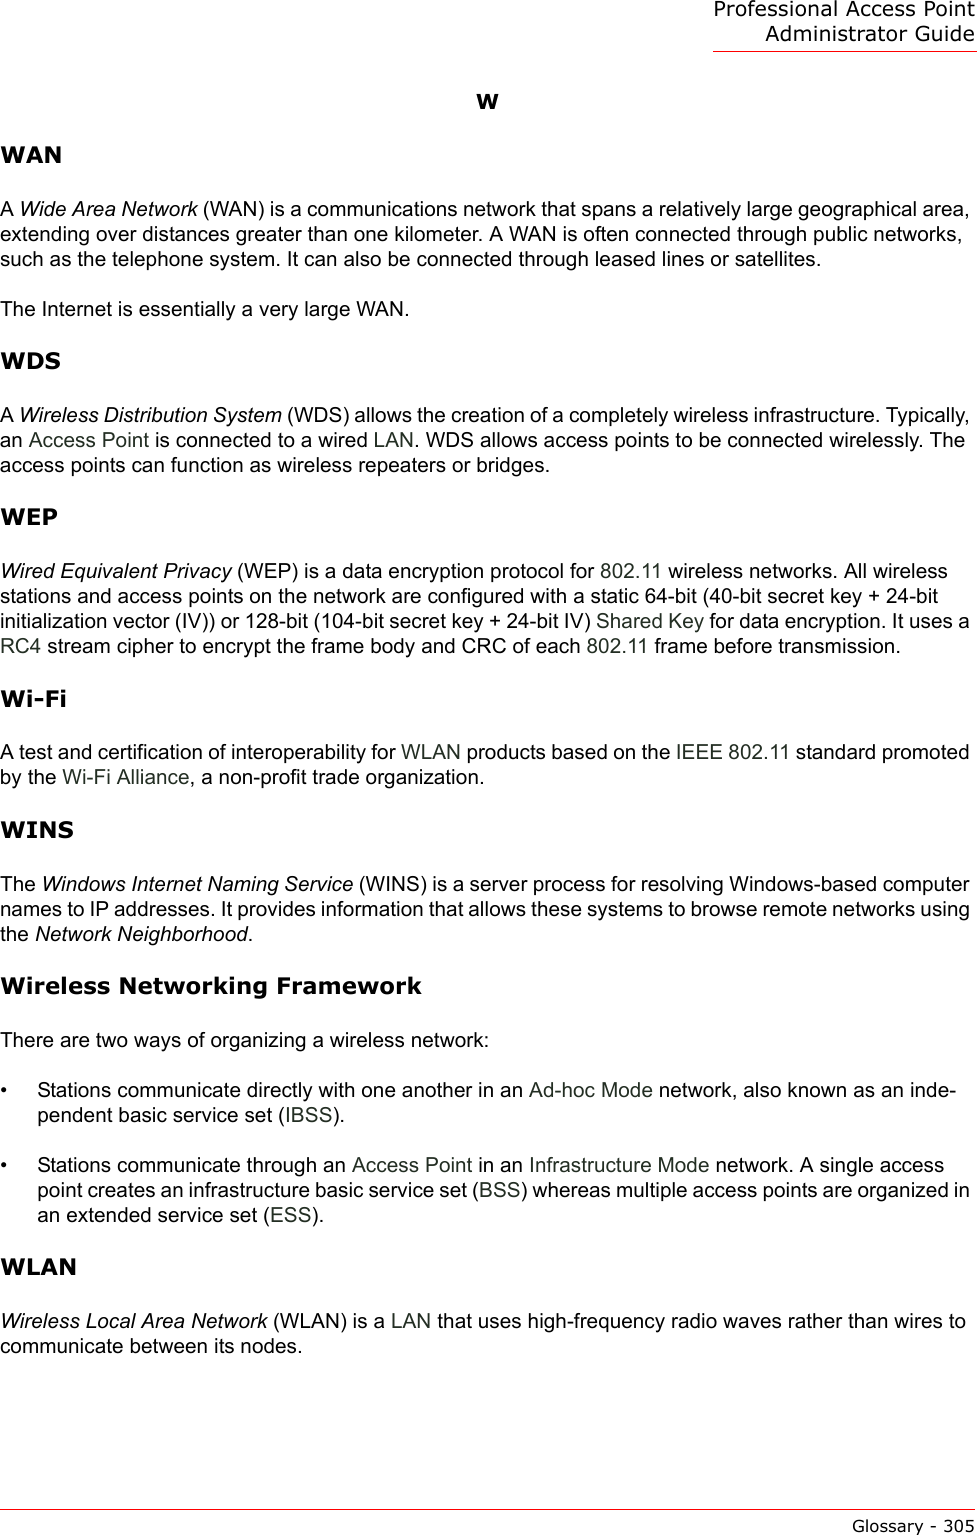 Professional Access Point Administrator GuideGlossary - 305WWANA Wide Area Network (WAN) is a communications network that spans a relatively large geographical area, extending over distances greater than one kilometer. A WAN is often connected through public networks, such as the telephone system. It can also be connected through leased lines or satellites.The Internet is essentially a very large WAN. WDSA Wireless Distribution System (WDS) allows the creation of a completely wireless infrastructure. Typically, an Access Point is connected to a wired LAN. WDS allows access points to be connected wirelessly. The access points can function as wireless repeaters or bridges.WEPWired Equivalent Privacy (WEP) is a data encryption protocol for 802.11 wireless networks. All wireless stations and access points on the network are configured with a static 64-bit (40-bit secret key + 24-bit initialization vector (IV)) or 128-bit (104-bit secret key + 24-bit IV) Shared Key for data encryption. It uses a RC4 stream cipher to encrypt the frame body and CRC of each 802.11 frame before transmission.Wi-FiA test and certification of interoperability for WLAN products based on the IEEE 802.11 standard promoted by the Wi-Fi Alliance, a non-profit trade organization.WINSThe Windows Internet Naming Service (WINS) is a server process for resolving Windows-based computer names to IP addresses. It provides information that allows these systems to browse remote networks using the Network Neighborhood. Wireless Networking FrameworkThere are two ways of organizing a wireless network:• Stations communicate directly with one another in an Ad-hoc Mode network, also known as an inde-pendent basic service set (IBSS).• Stations communicate through an Access Point in an Infrastructure Mode network. A single access point creates an infrastructure basic service set (BSS) whereas multiple access points are organized in an extended service set (ESS).WLANWireless Local Area Network (WLAN) is a LAN that uses high-frequency radio waves rather than wires to communicate between its nodes.